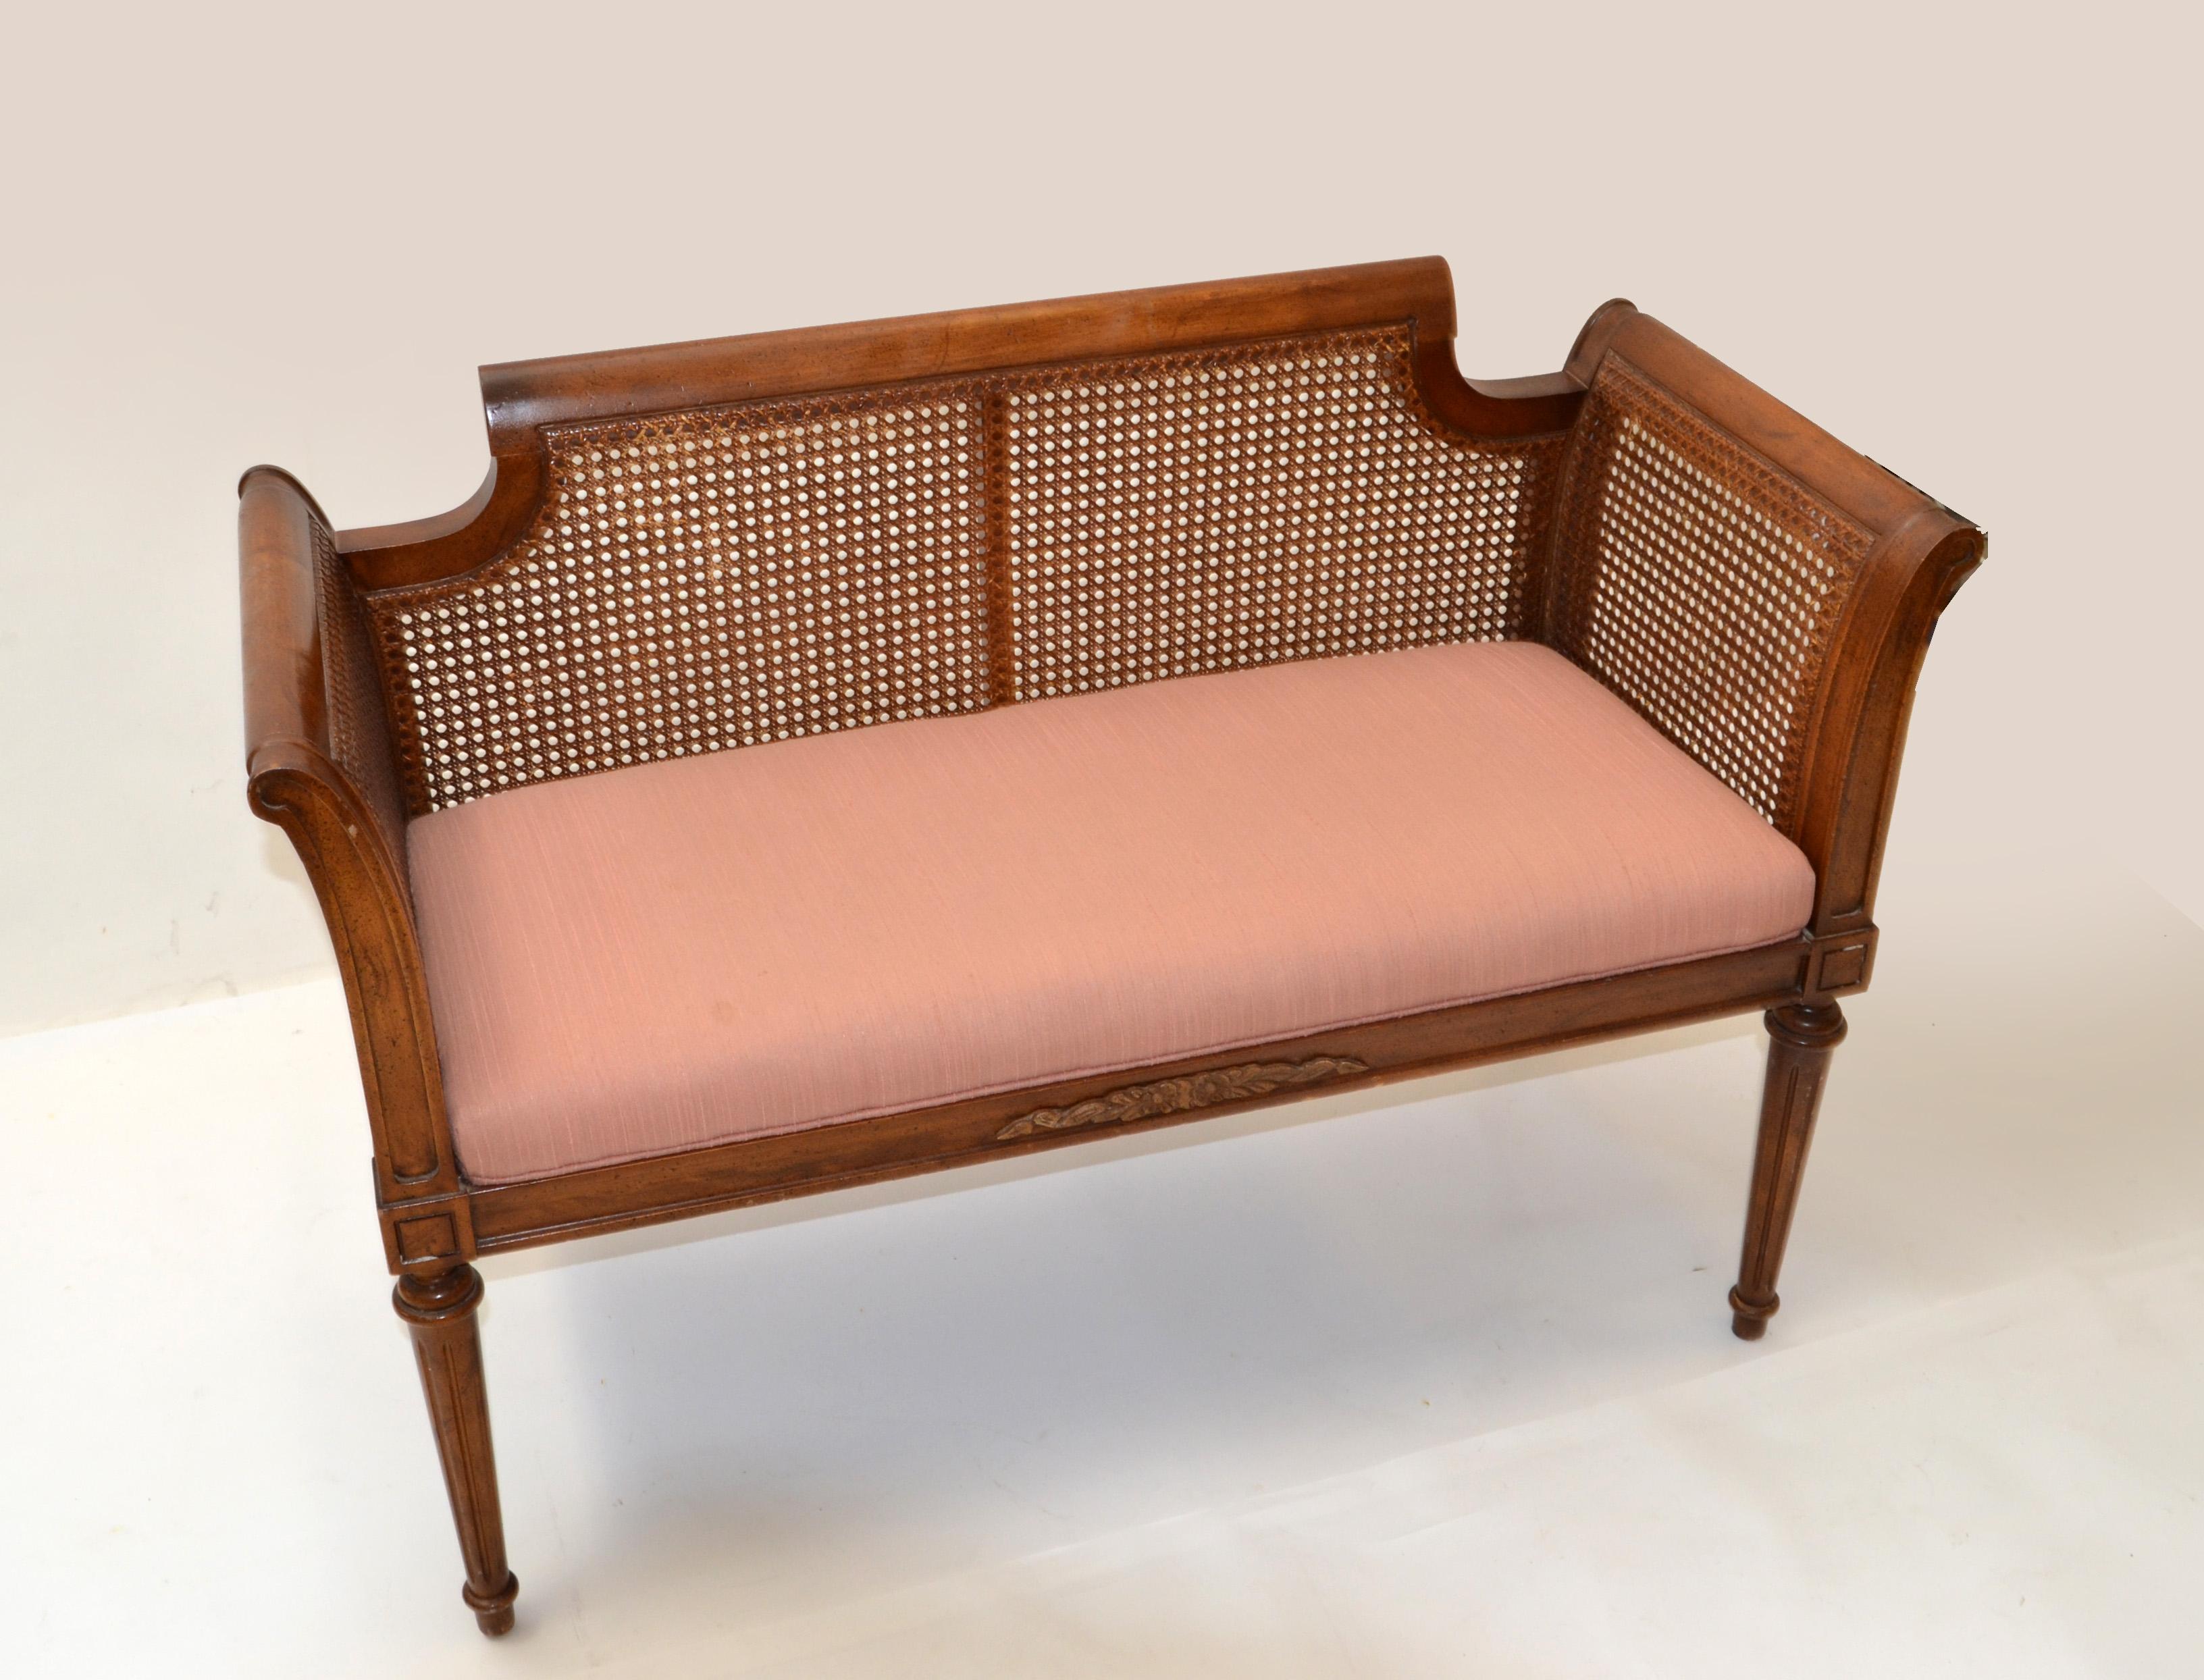 American Hollywood Regency classic bench with peach cotton Seat Upholstery.
All around woven caning frame and a sturdy base with turned wooden legs and carved lines for Decor.
Great clean line design.
In all good condition with some normal wear